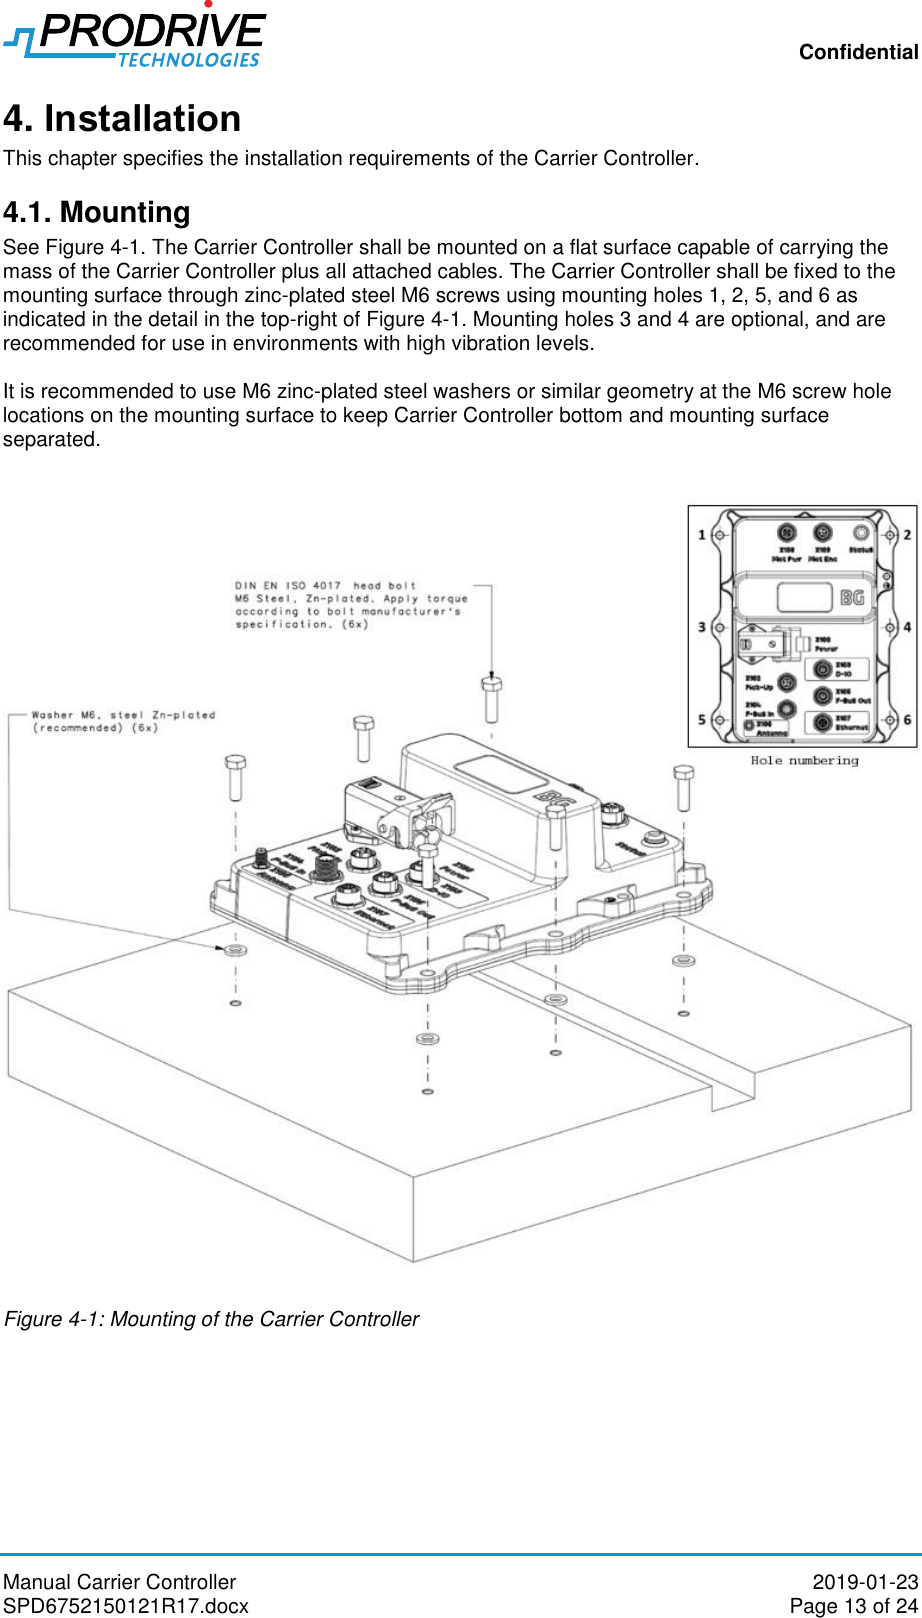 Confidential Manual Carrier Controller  2019-01-23 SPD6752150121R17.docx  Page 13 of 24 4. Installation This chapter specifies the installation requirements of the Carrier Controller.  4.1. Mounting See Figure 4-1. The Carrier Controller shall be mounted on a flat surface capable of carrying the mass of the Carrier Controller plus all attached cables. The Carrier Controller shall be fixed to the mounting surface through zinc-plated steel M6 screws using mounting holes 1, 2, 5, and 6 as indicated in the detail in the top-right of Figure 4-1. Mounting holes 3 and 4 are optional, and are recommended for use in environments with high vibration levels.  It is recommended to use M6 zinc-plated steel washers or similar geometry at the M6 screw hole locations on the mounting surface to keep Carrier Controller bottom and mounting surface separated.     Figure 4-1: Mounting of the Carrier Controller   